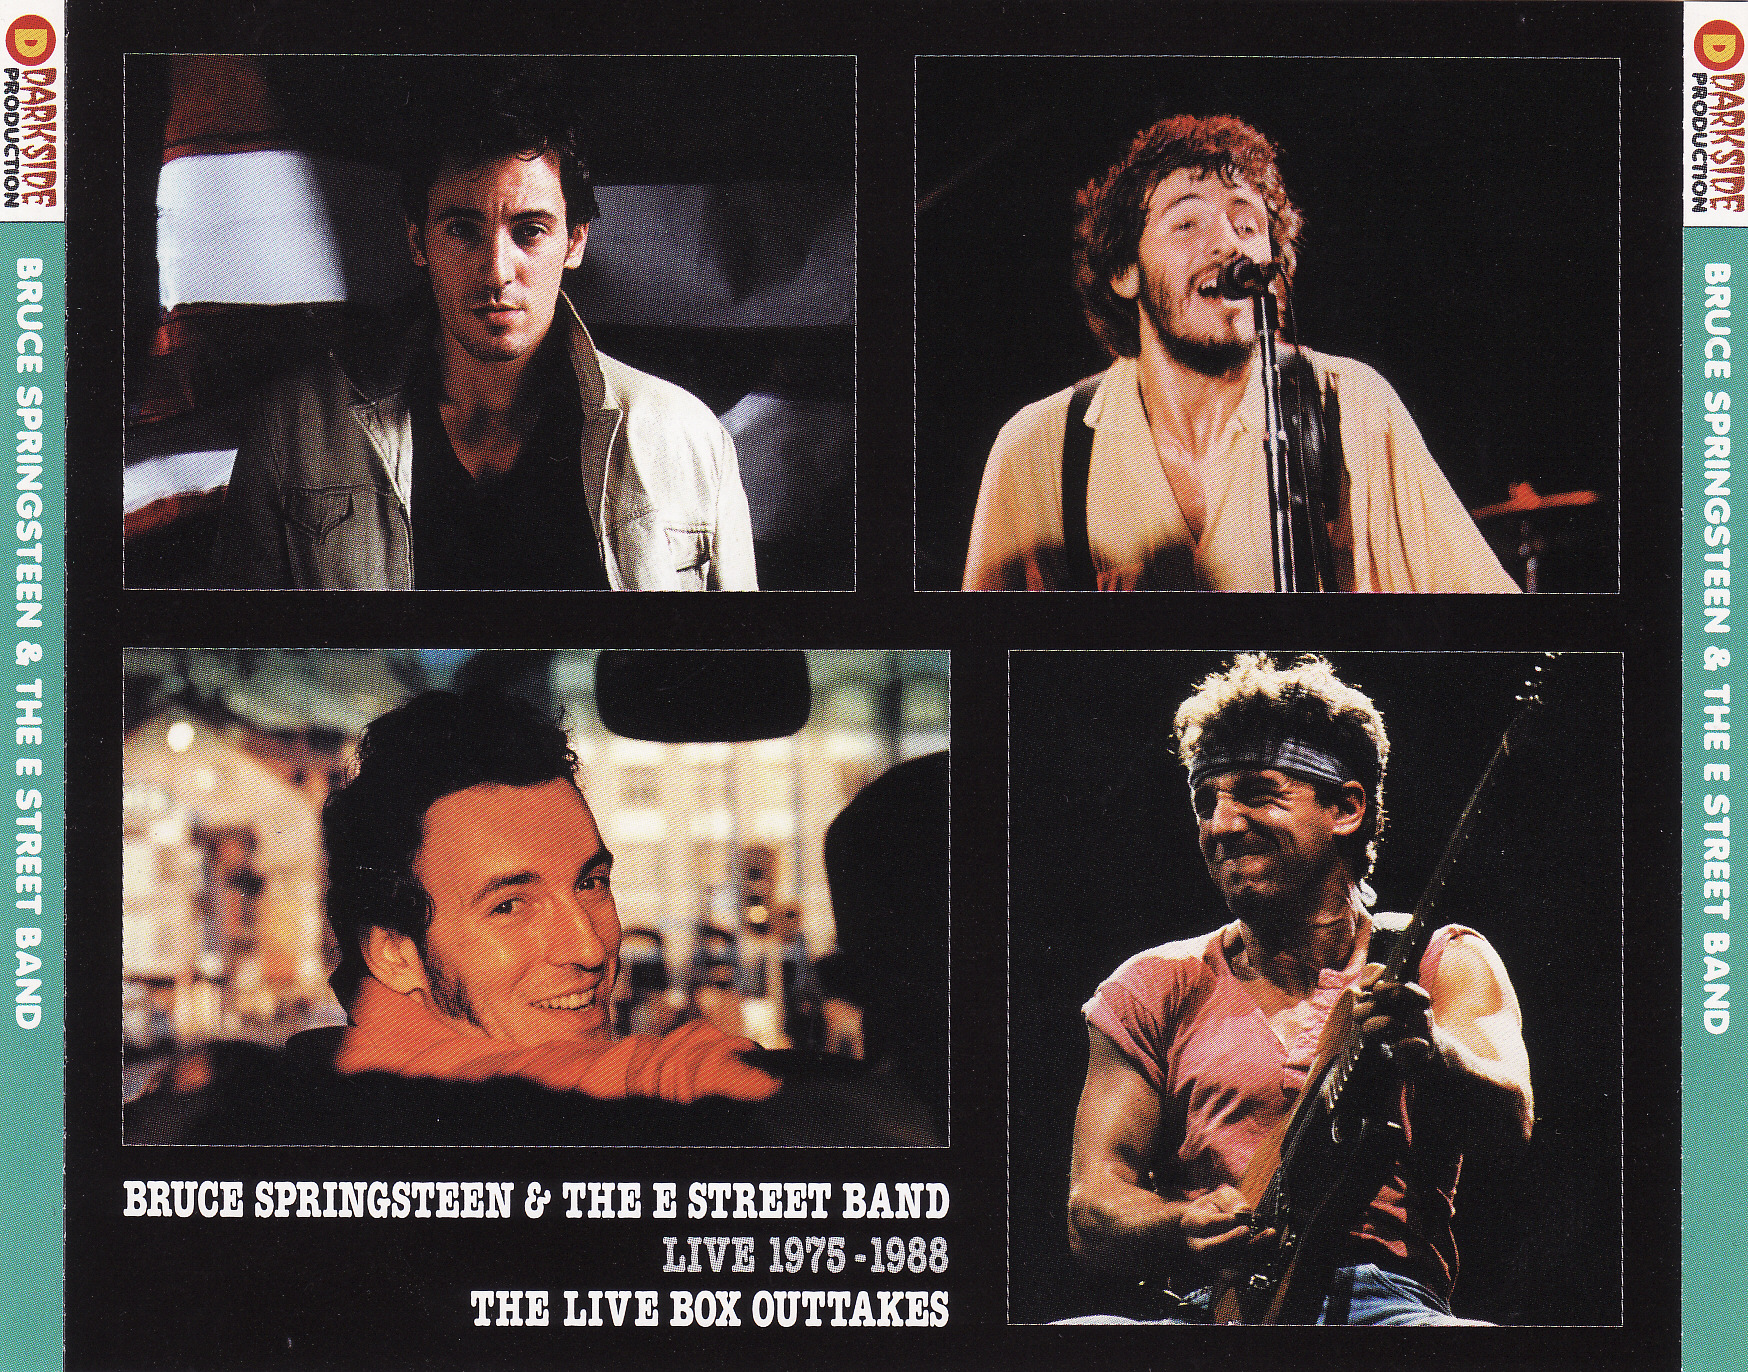 BruceSpringsteenAndTheEStreetBand1975-1988TheLiveBoxOuttakes (1).jpg